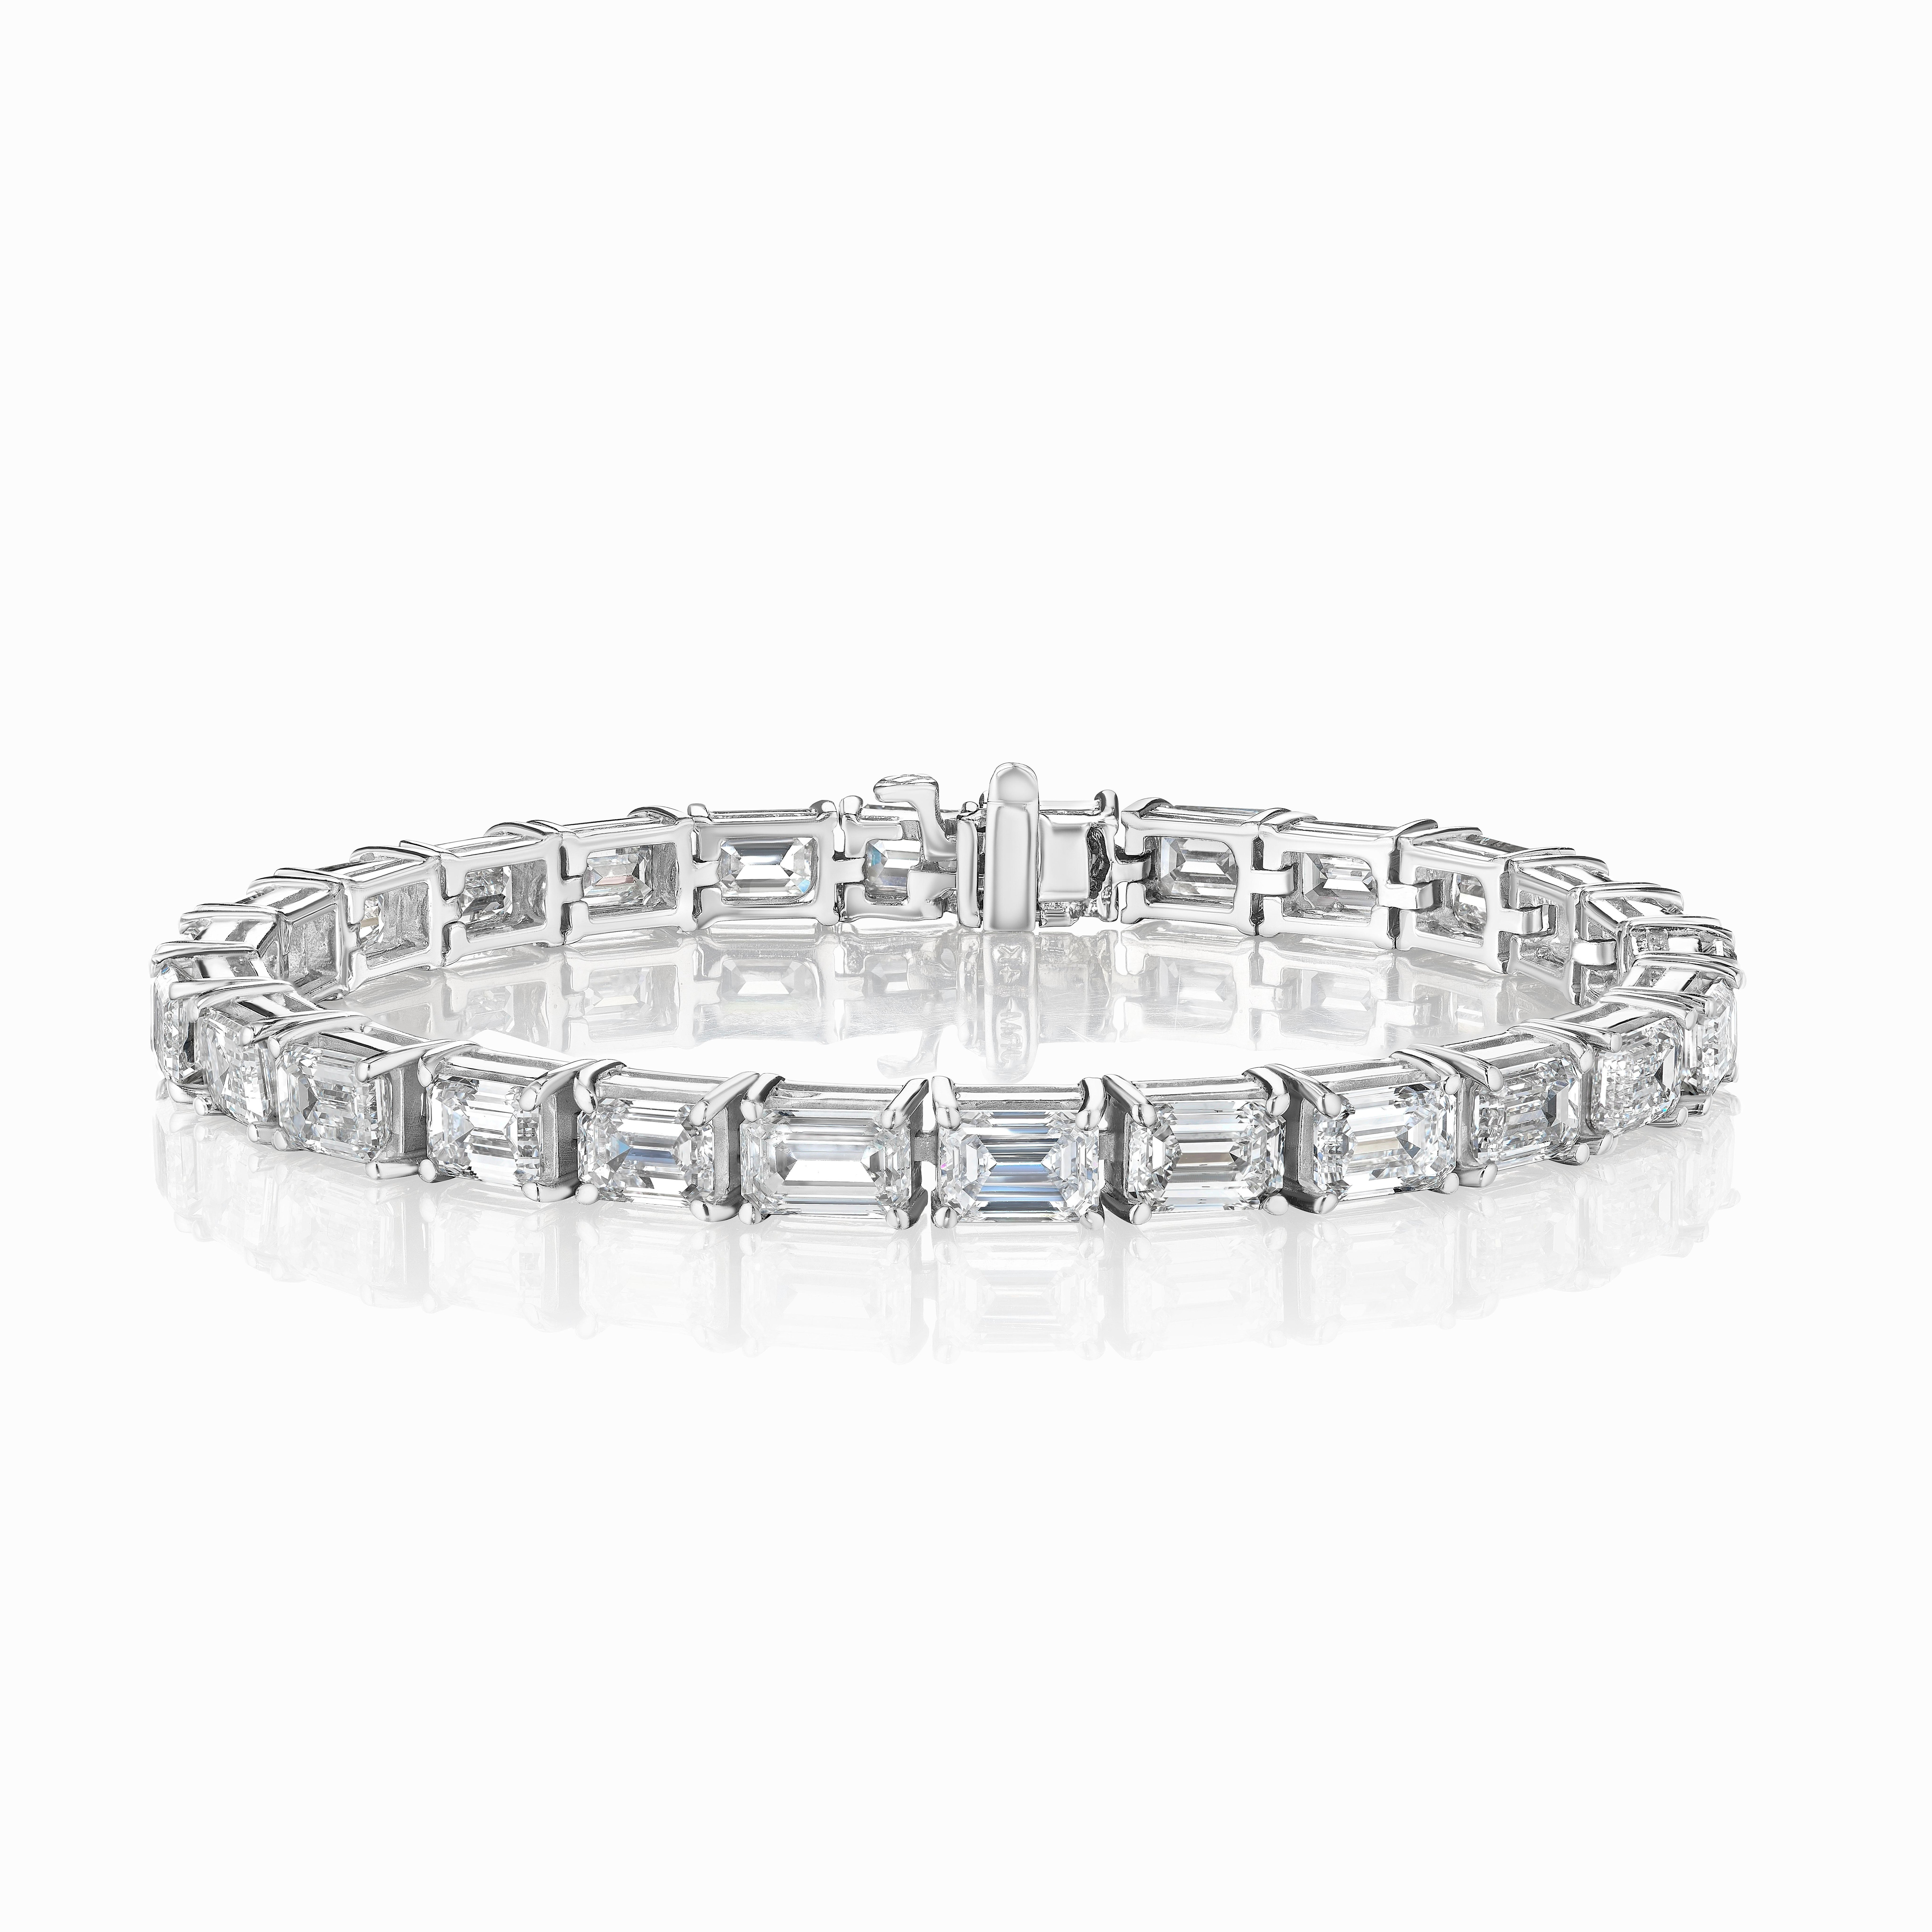 This beautiful tennis bracelet features 26 perfectly matched Emerald Cut Diamonds set in East West setting for a very elegant and sophisticated look.
Every Diamond is GIA certified as DEF color and VS clarity. 
18.20 carats total. 
Measures 6.75